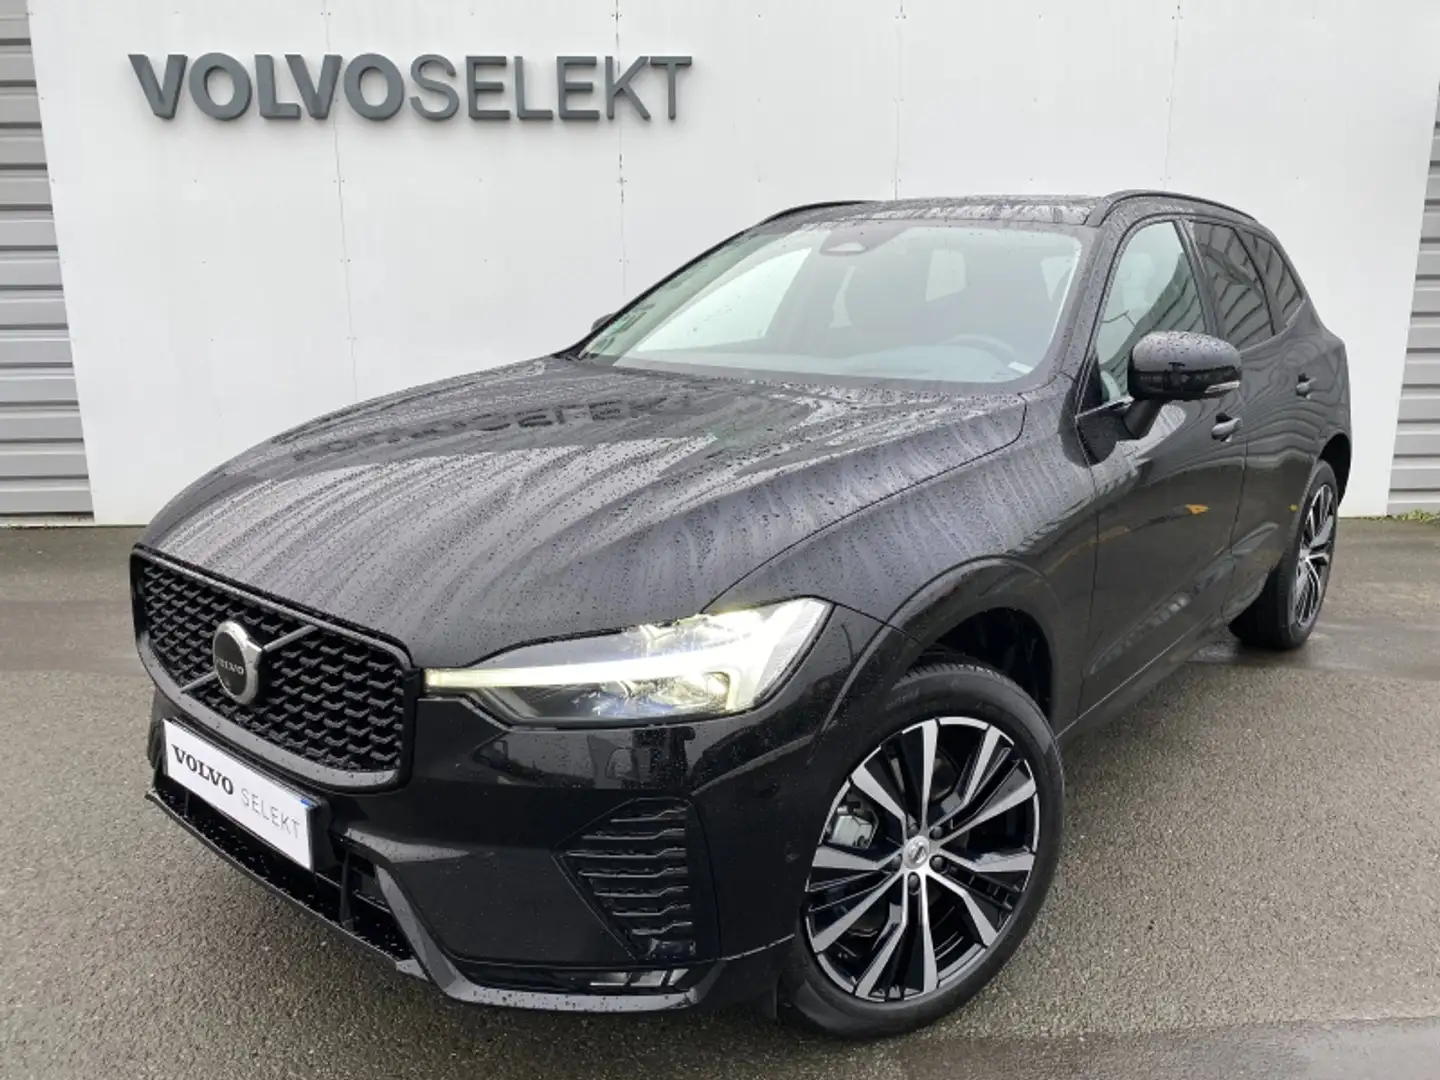 Volvo XC60 B4 197ch Ultimate Style Dark Geartronic - 1